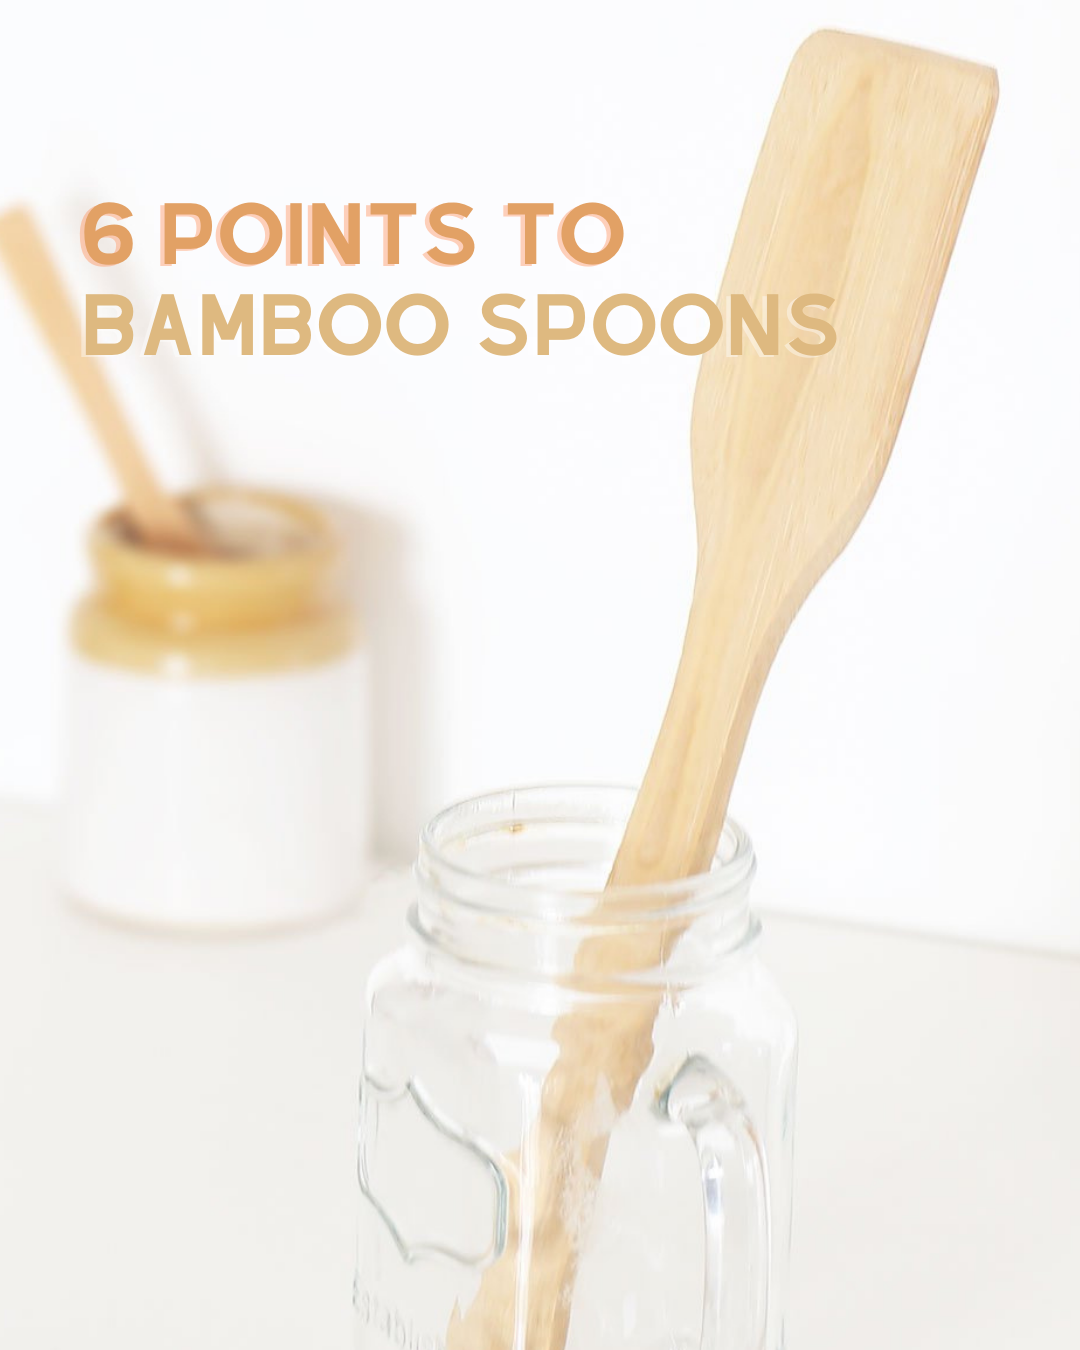 6 Points for Bamboo Spoons